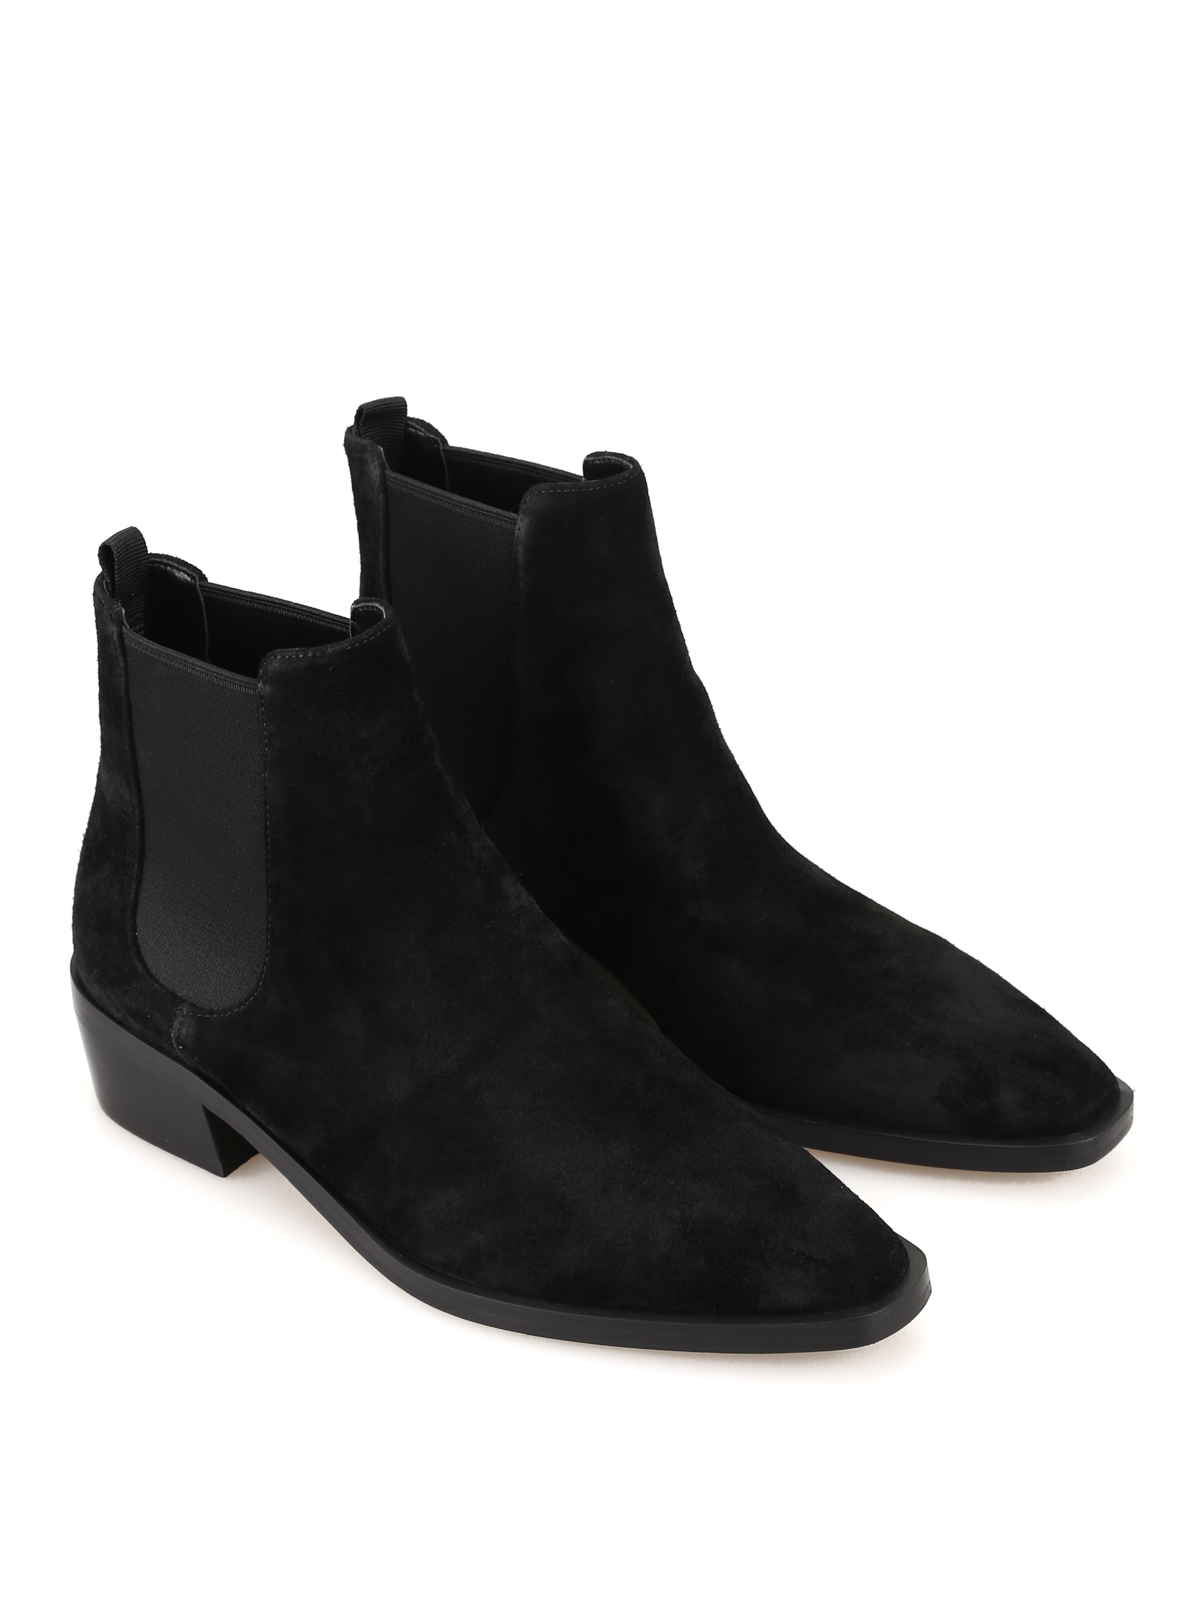 michael kors ankle boots